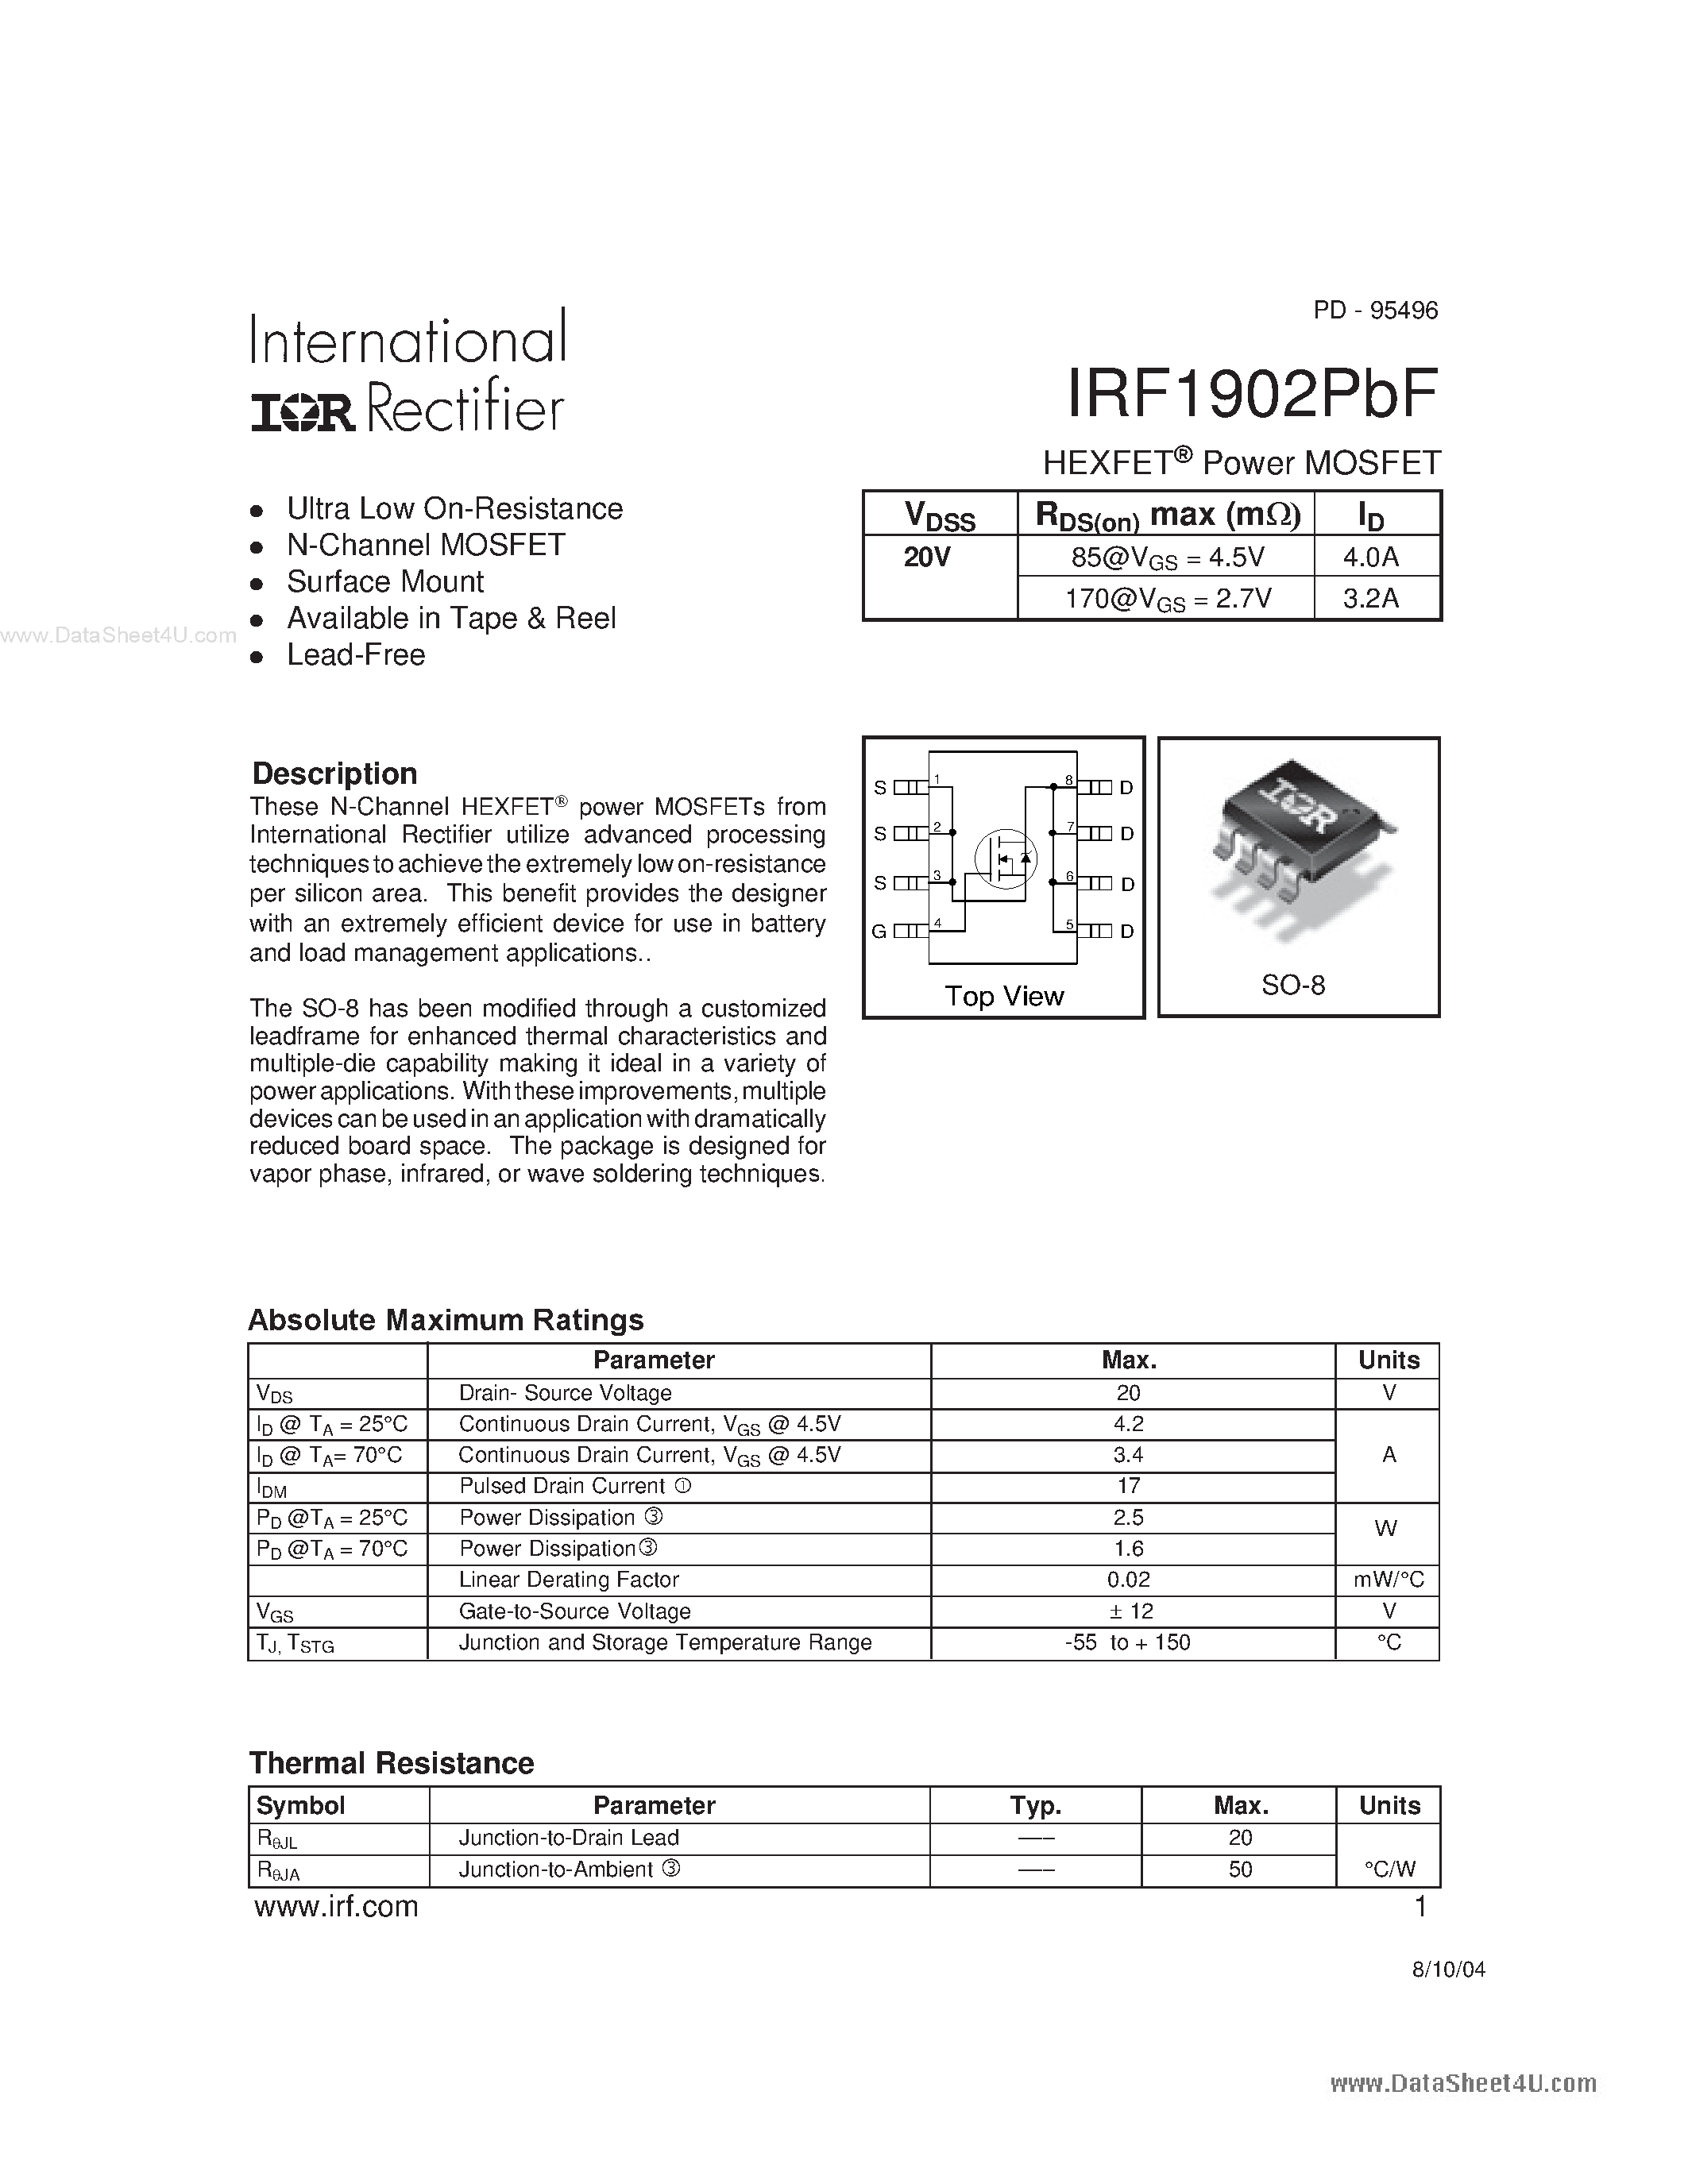 Даташит IRF1902PBF - HEXFET Power MOSFET страница 1